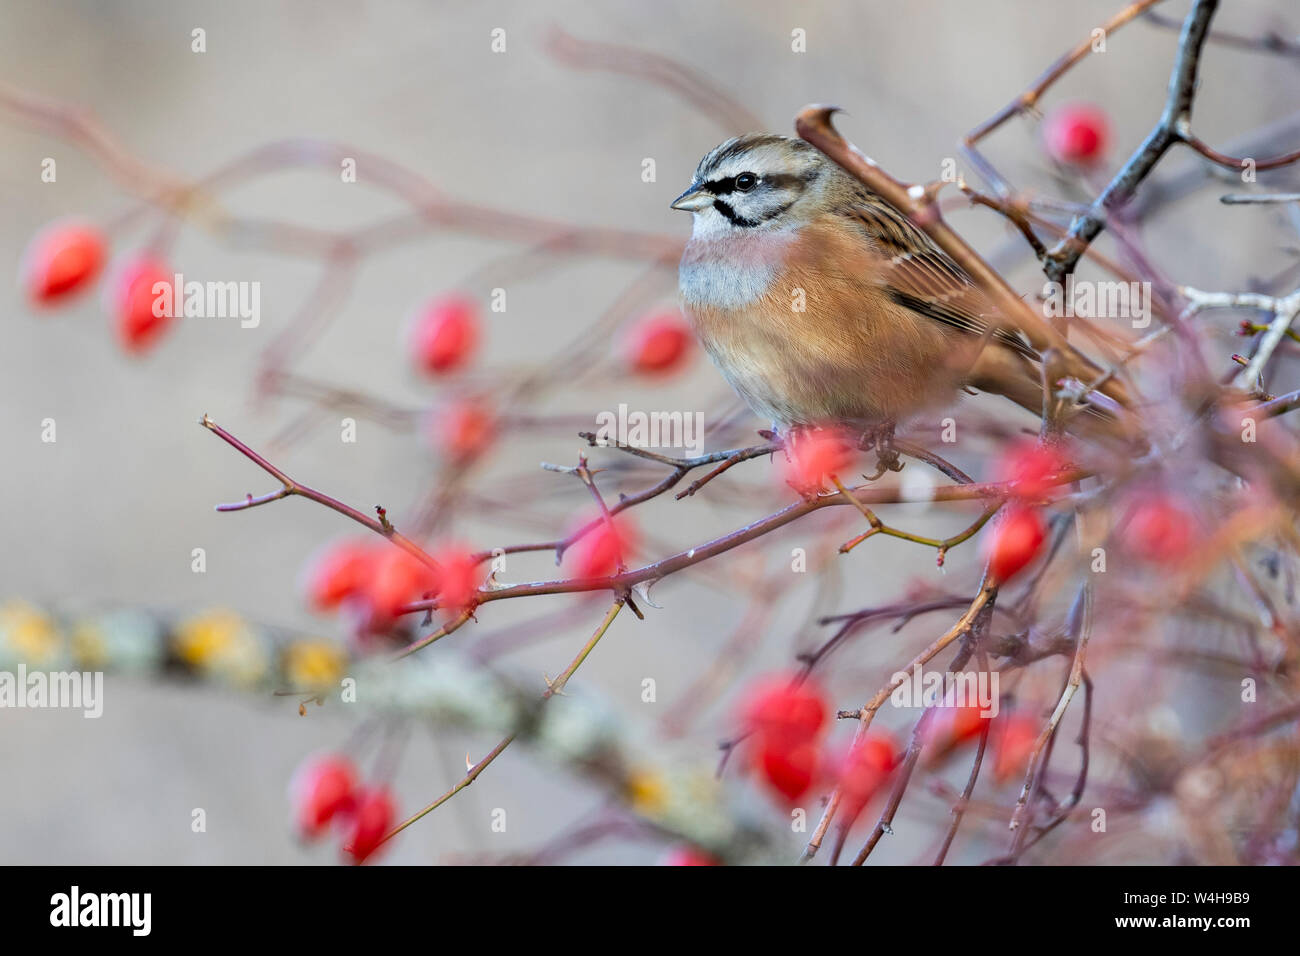 Bunting (Emberiza cia) in autumn perched on a branch of wild rose with red berries Stock Photo